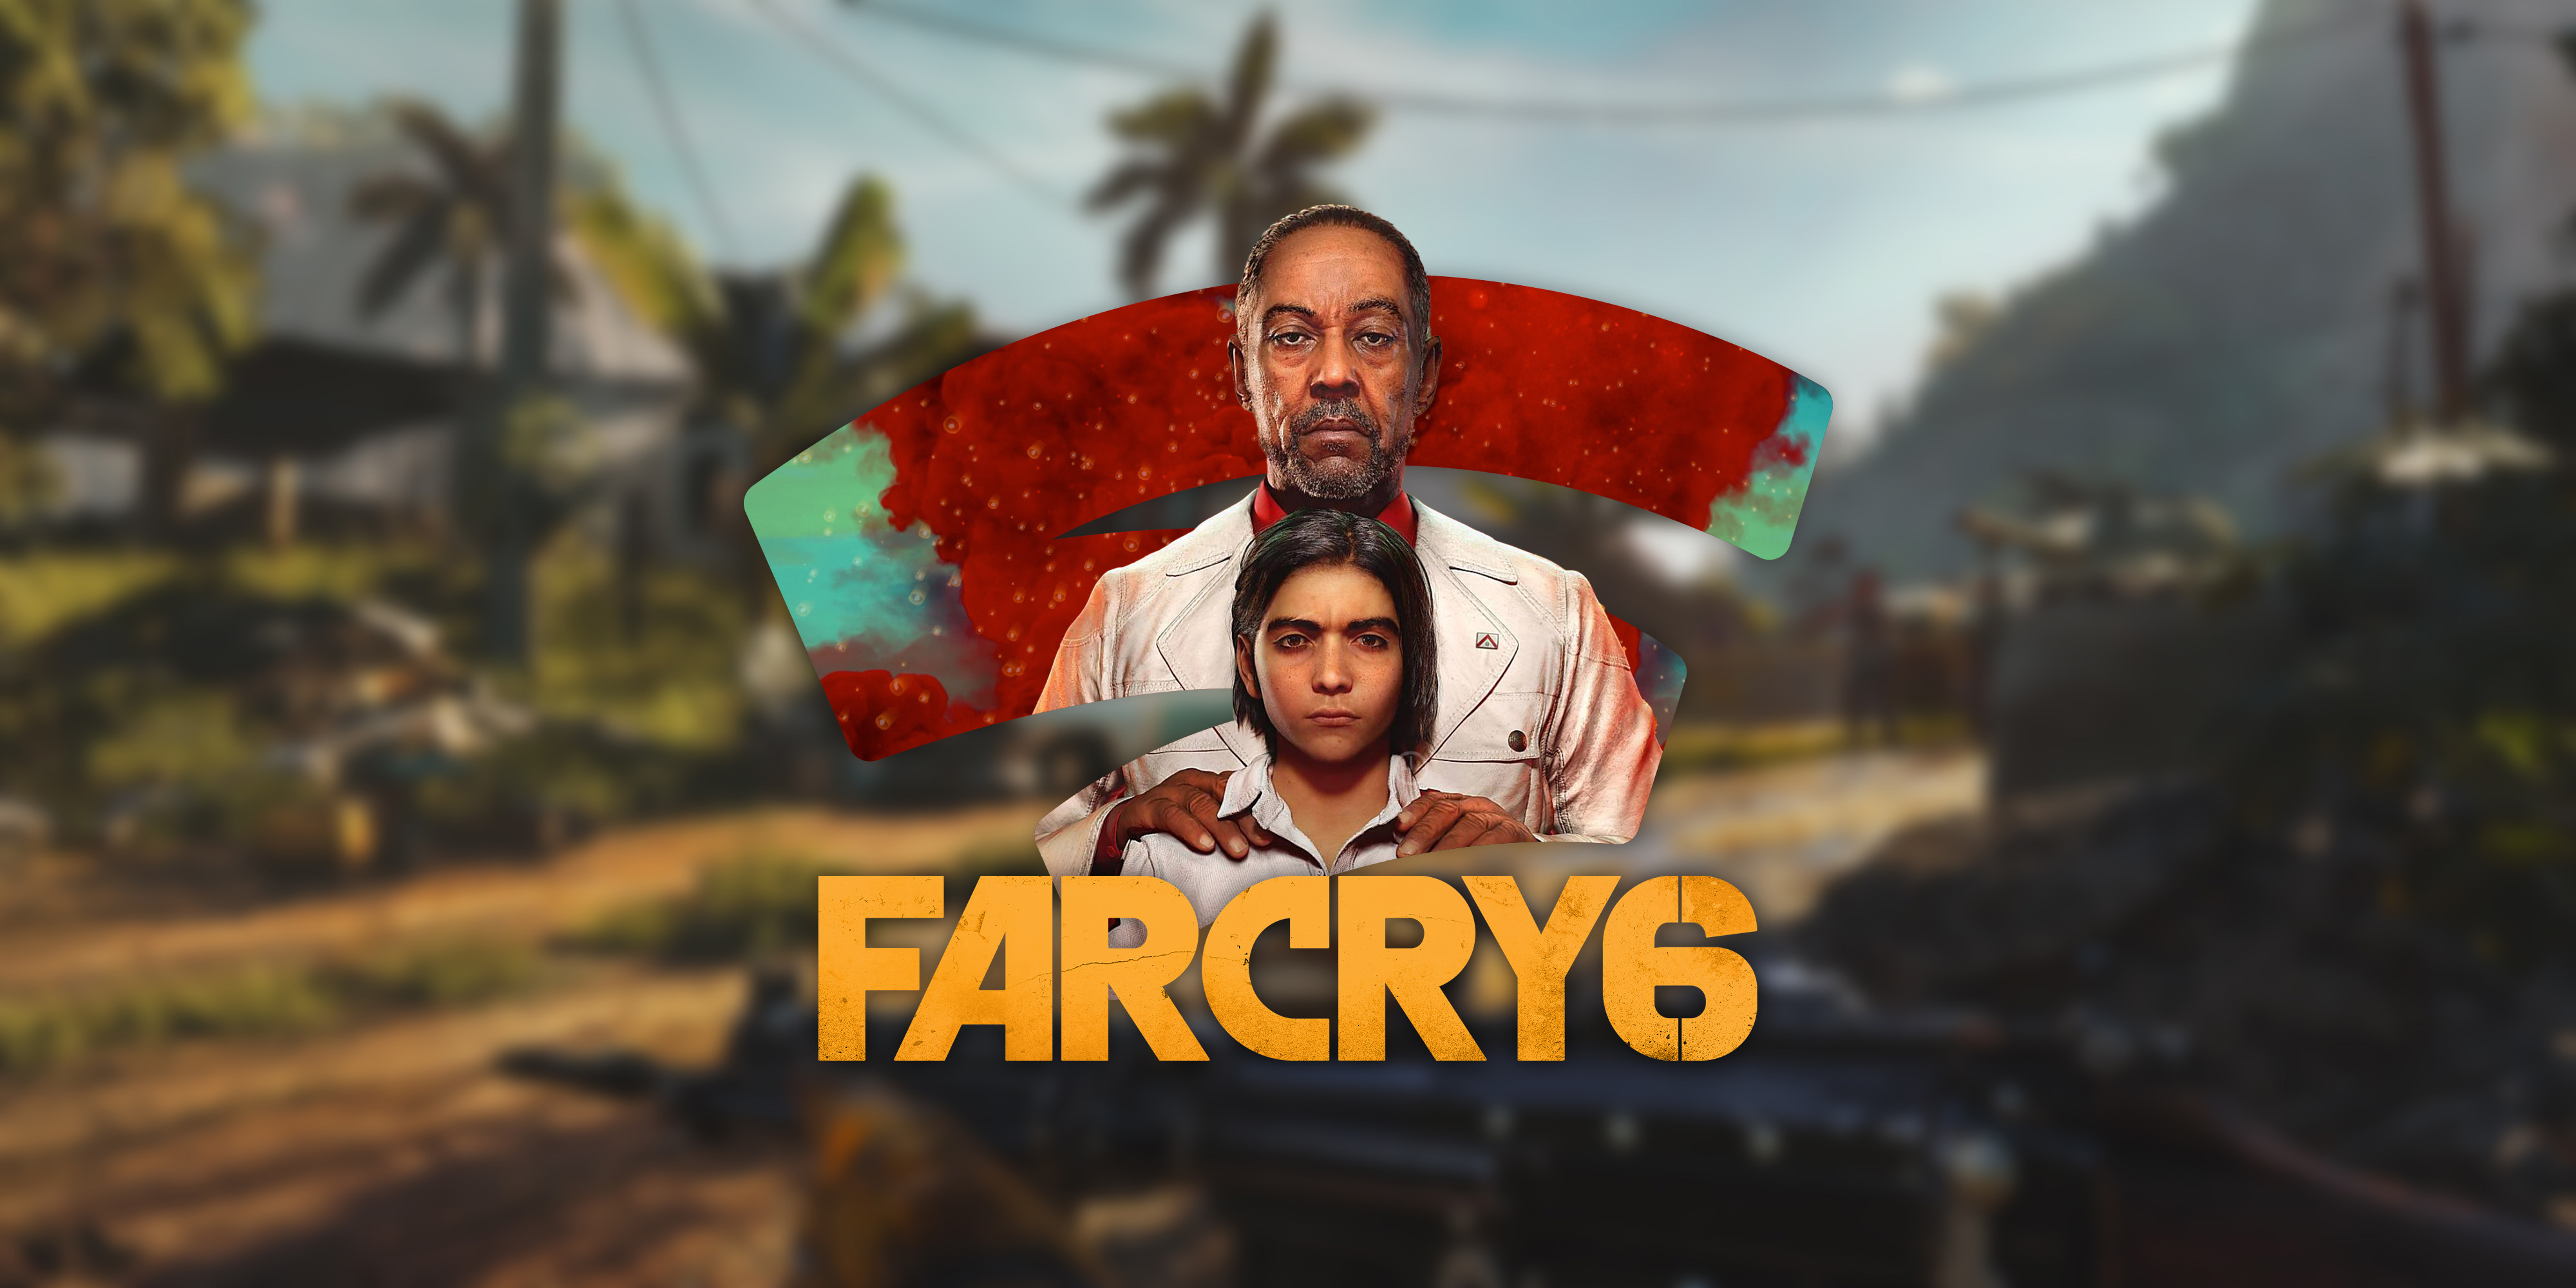 Far cry 6 crossplay co-op with friend on pc? : r/Stadia